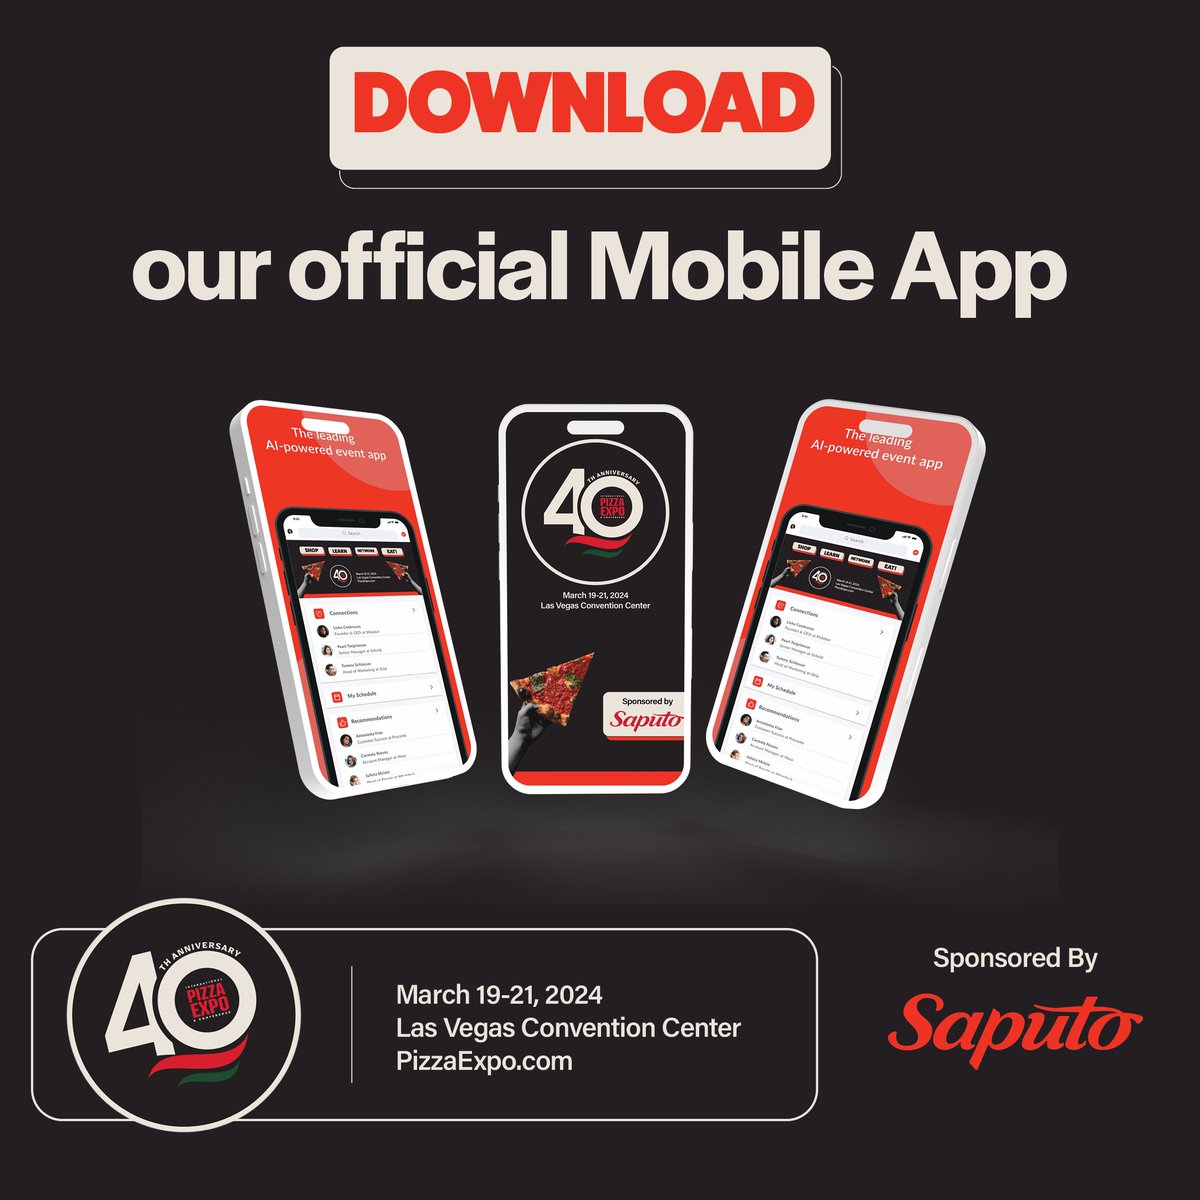 Maximize your show experience with our free mobile app! 📱 Get instant access to the schedule, floor map, & our powerful matchmaking tool. Sponsored by @SaputoInc Download now from the Apple Store and Google Play! 🔗: hubs.ly/Q02pylcv0